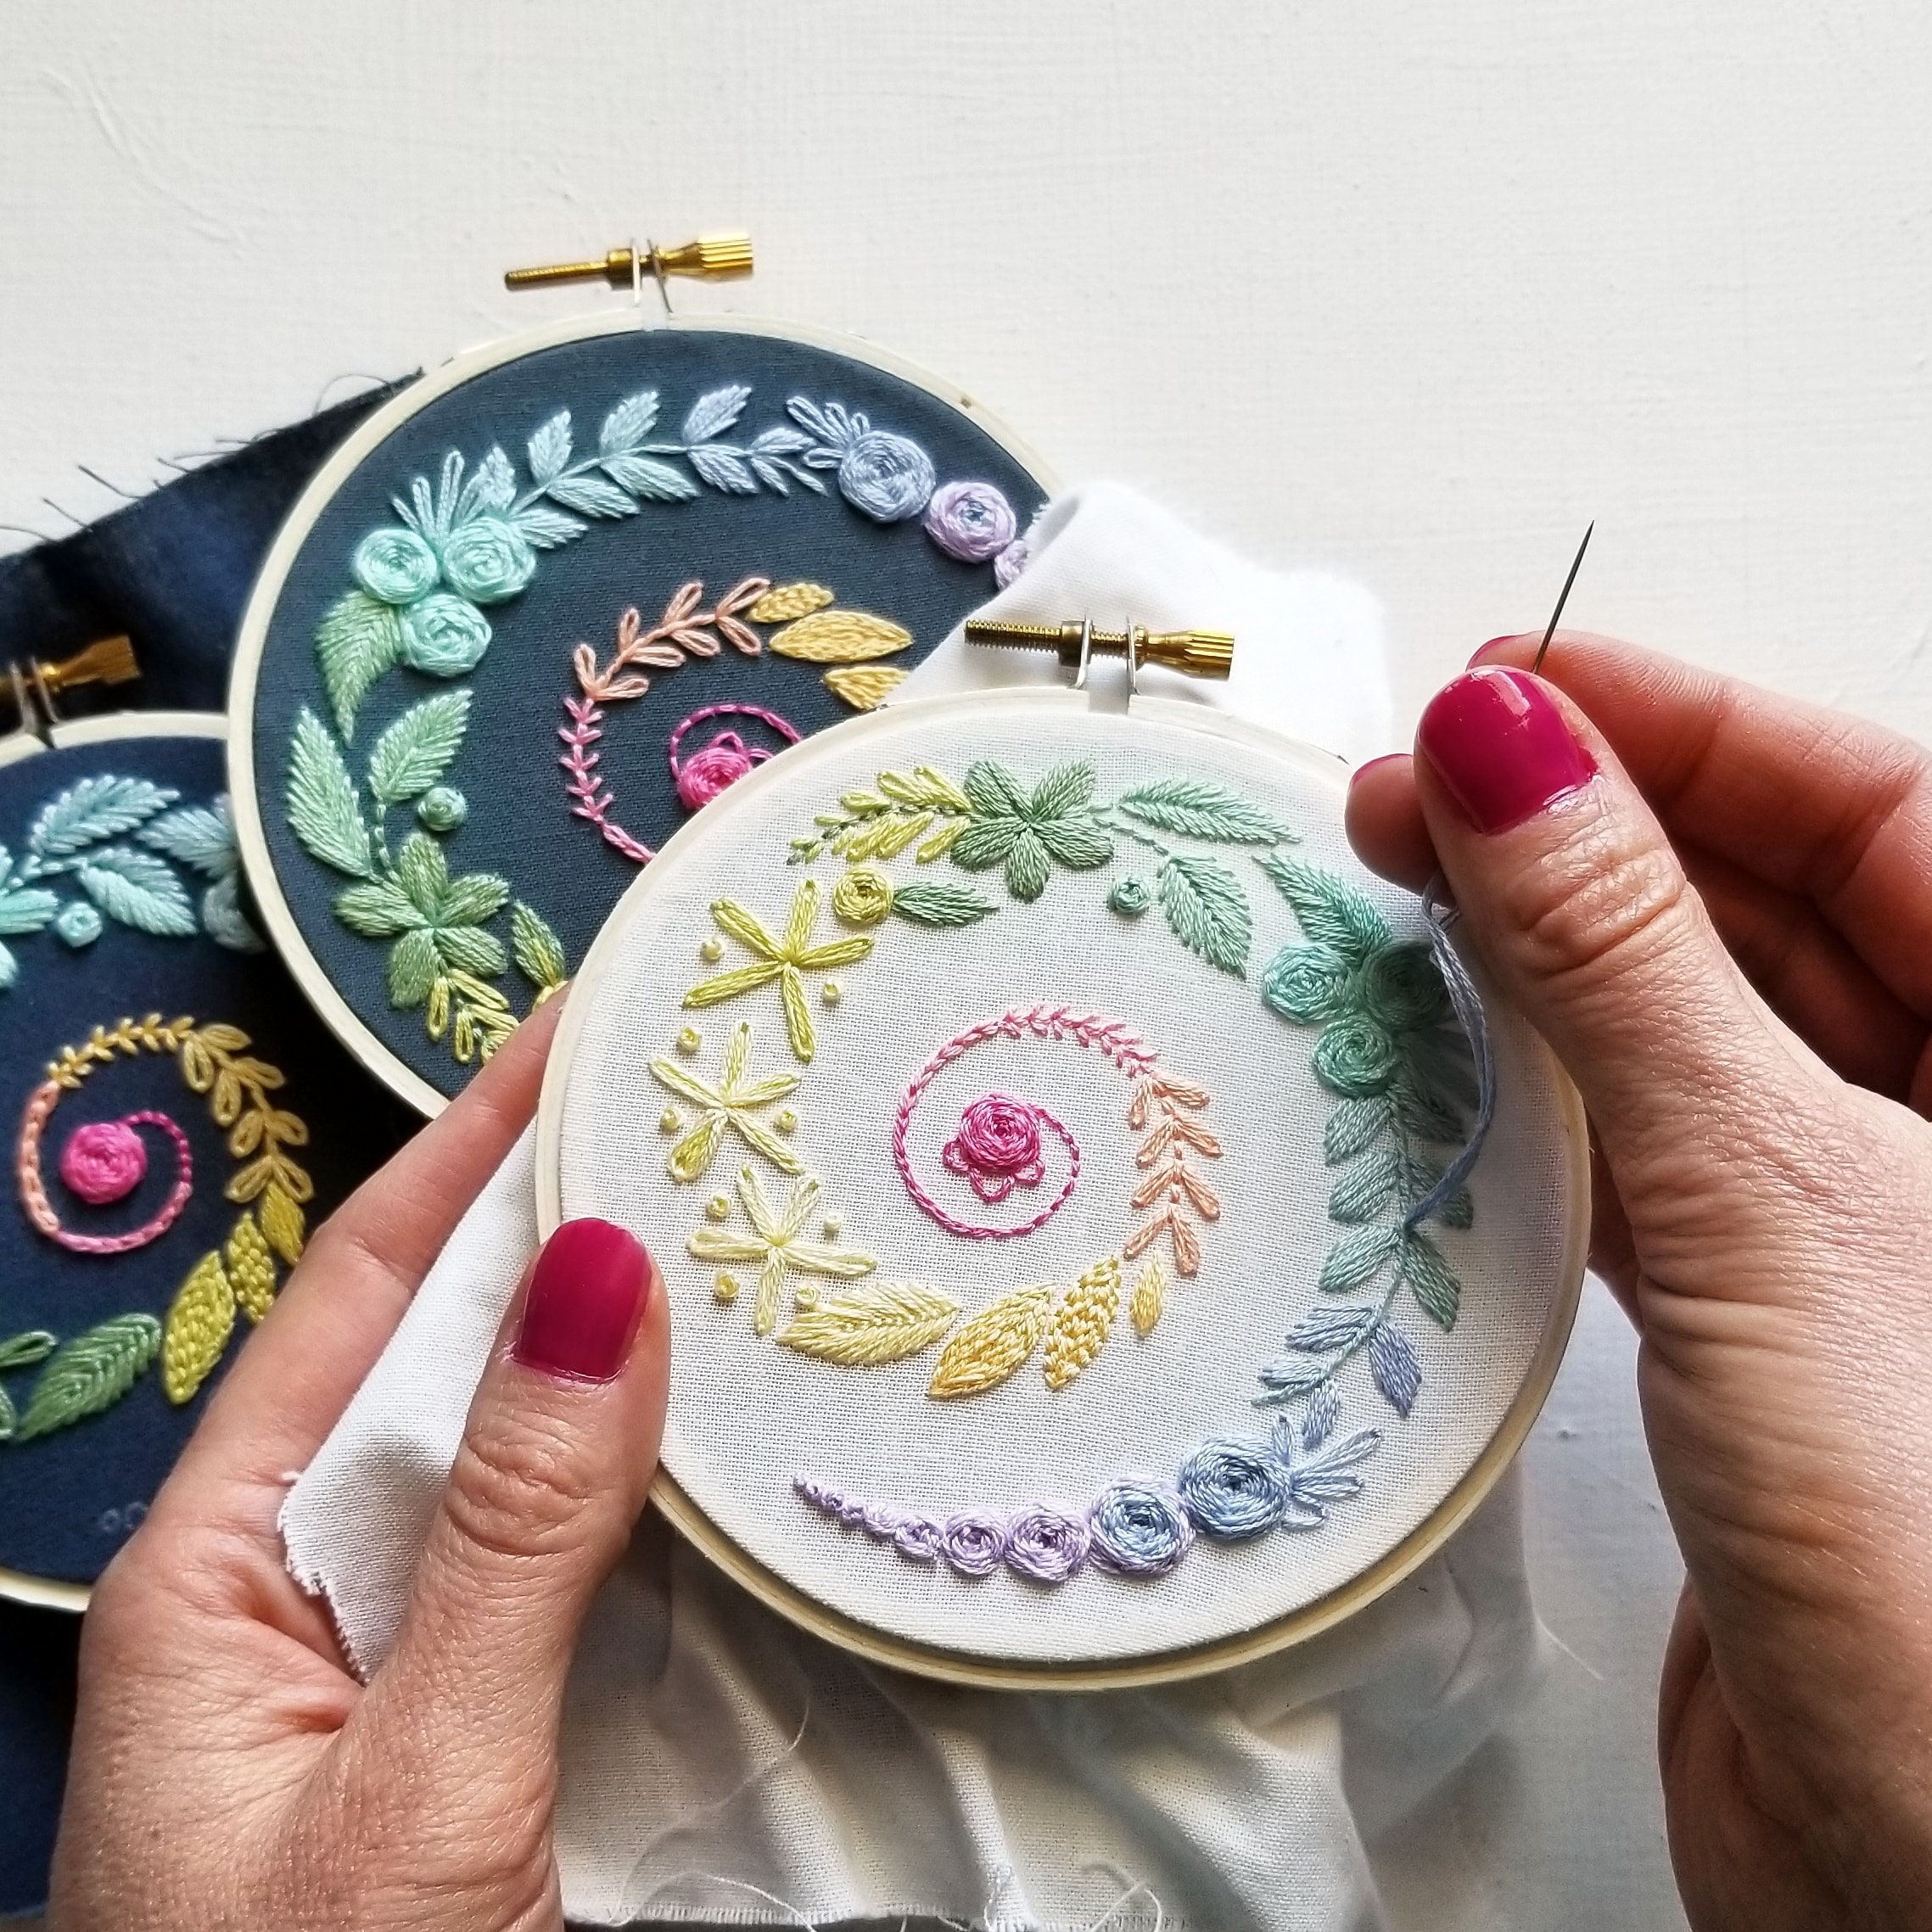 Beginner Hand Embroidery Kit With Online Class, Rainbow Spiral Needlework  Pattern, Easy Embroidery Video Tutorial, Basic Stitch Lesson 